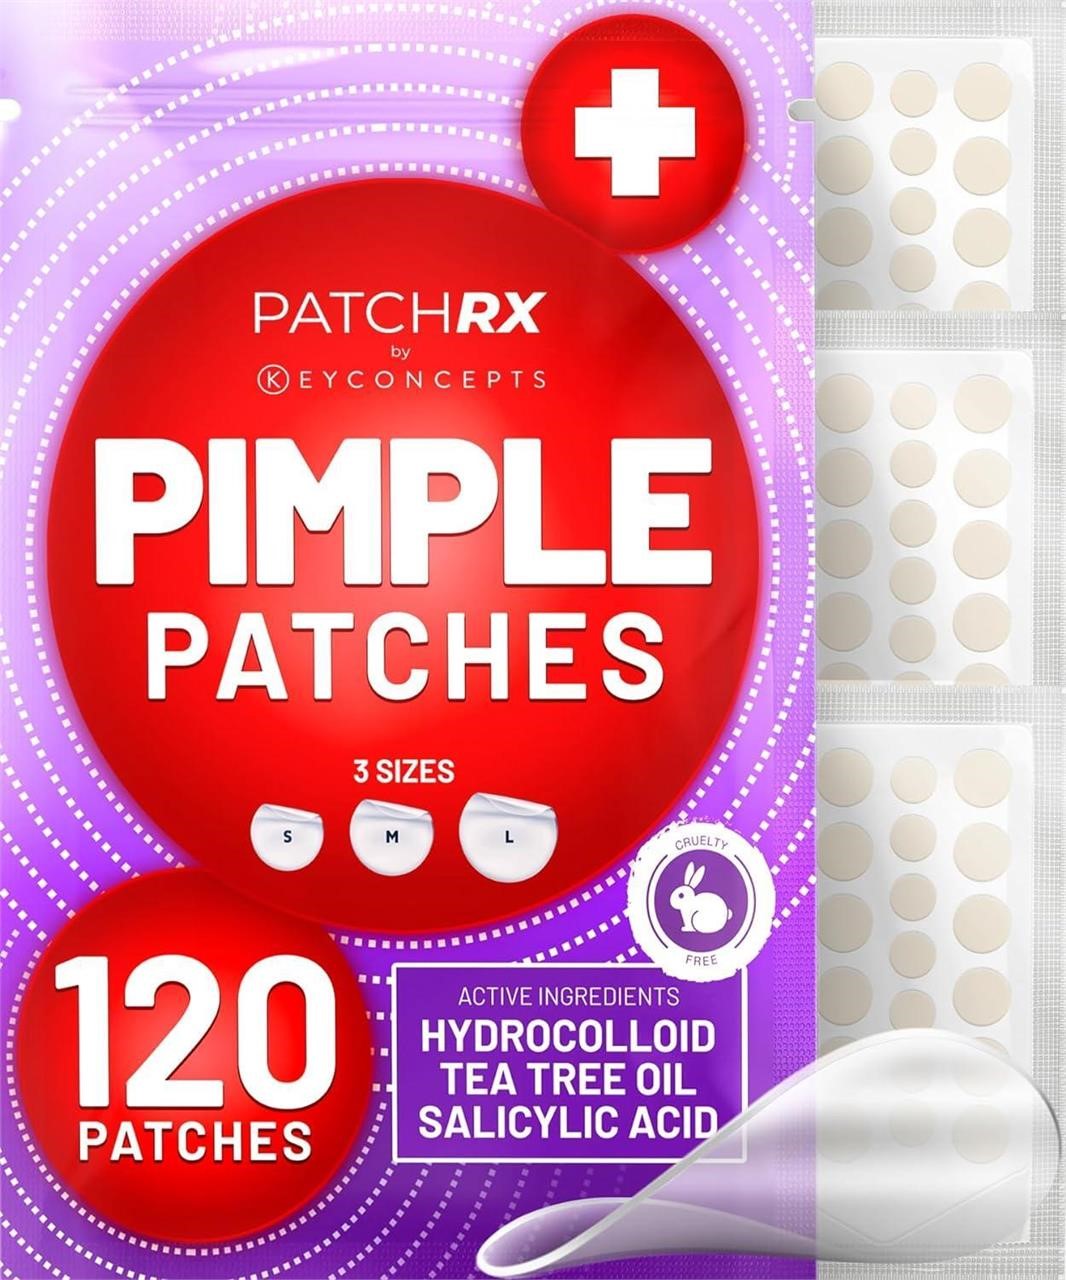 SEALED-KEYCONCEPTS Salicylic Pimple Patches x5